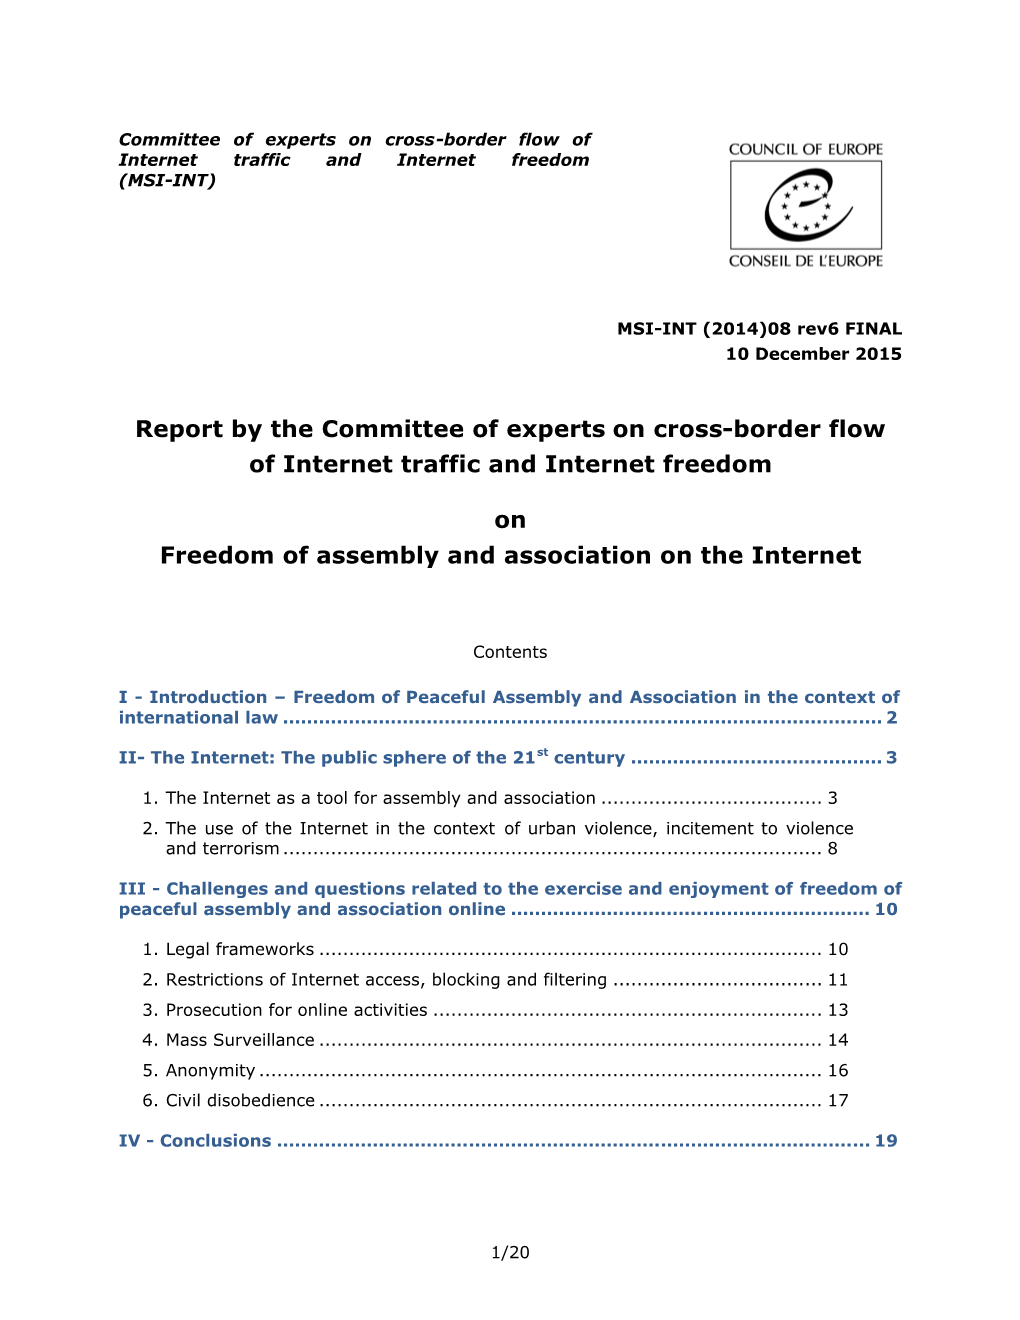 Report by the Committee of Experts on Cross-Border Flow of Internet Traffic and Internet Freedom on Freedom of Assembly and Asso